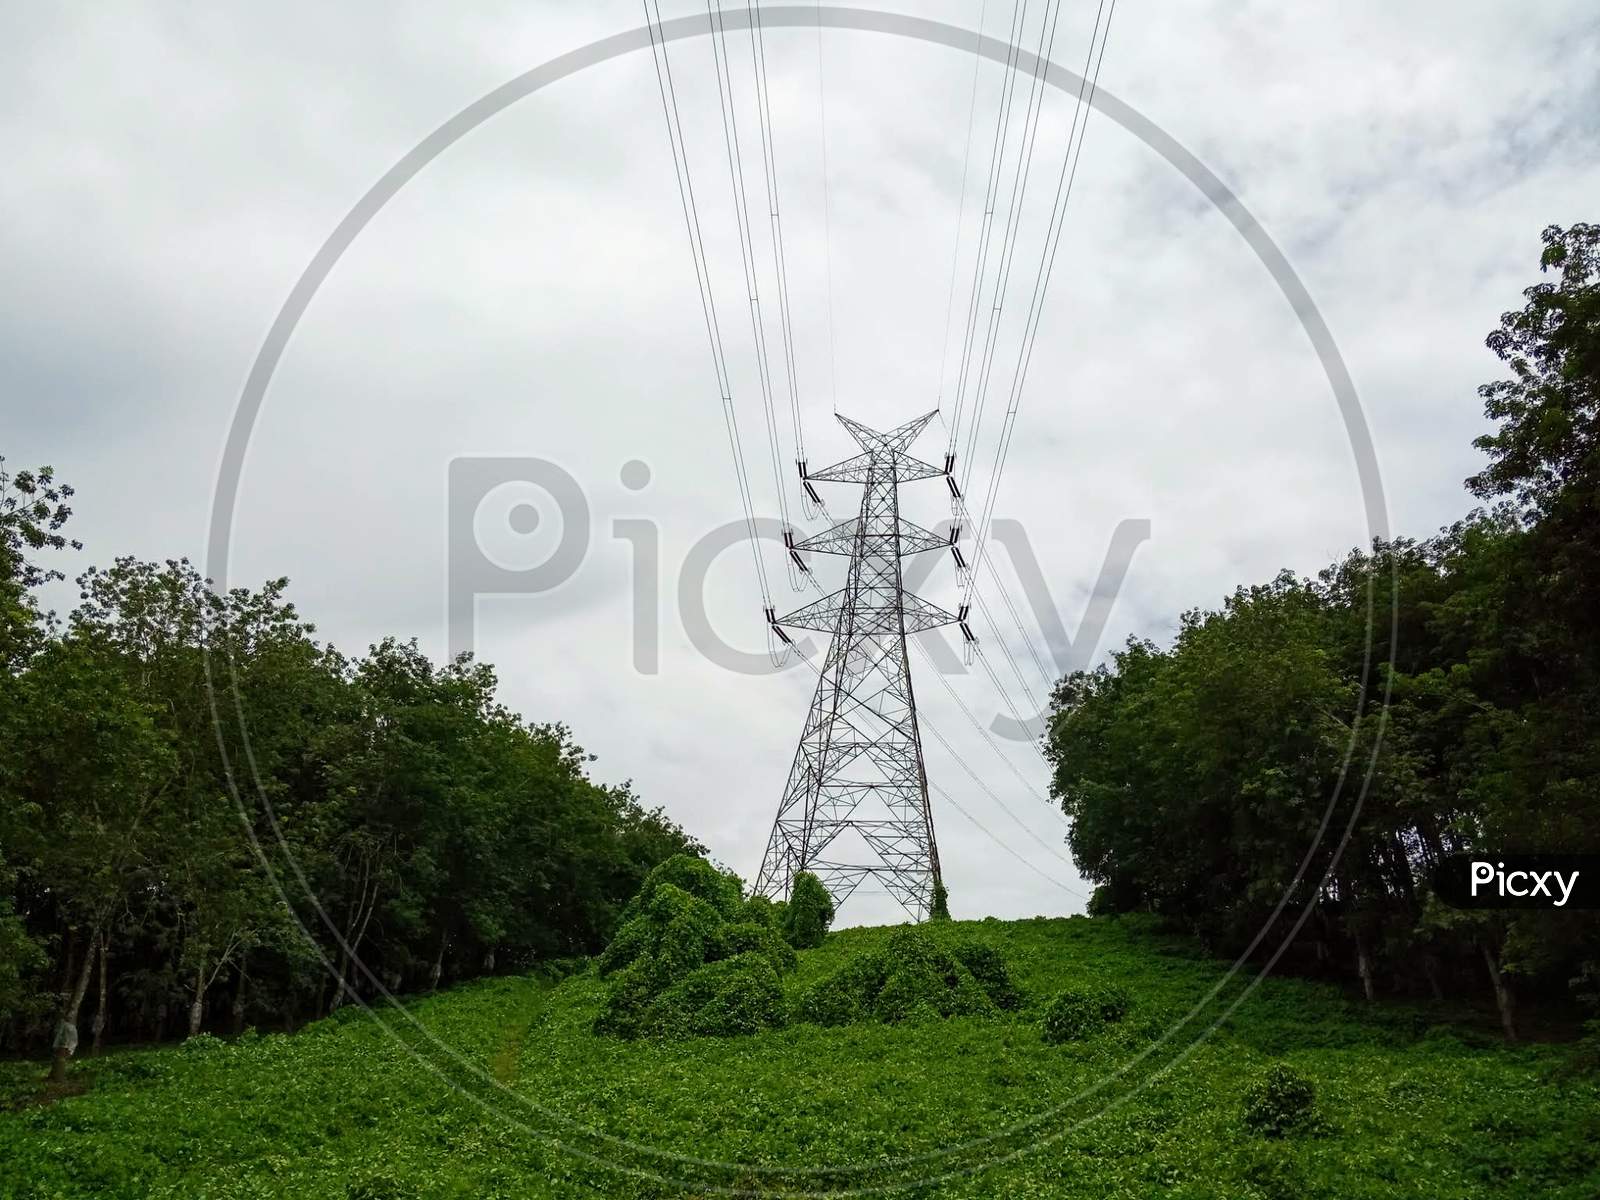 Electric power lines